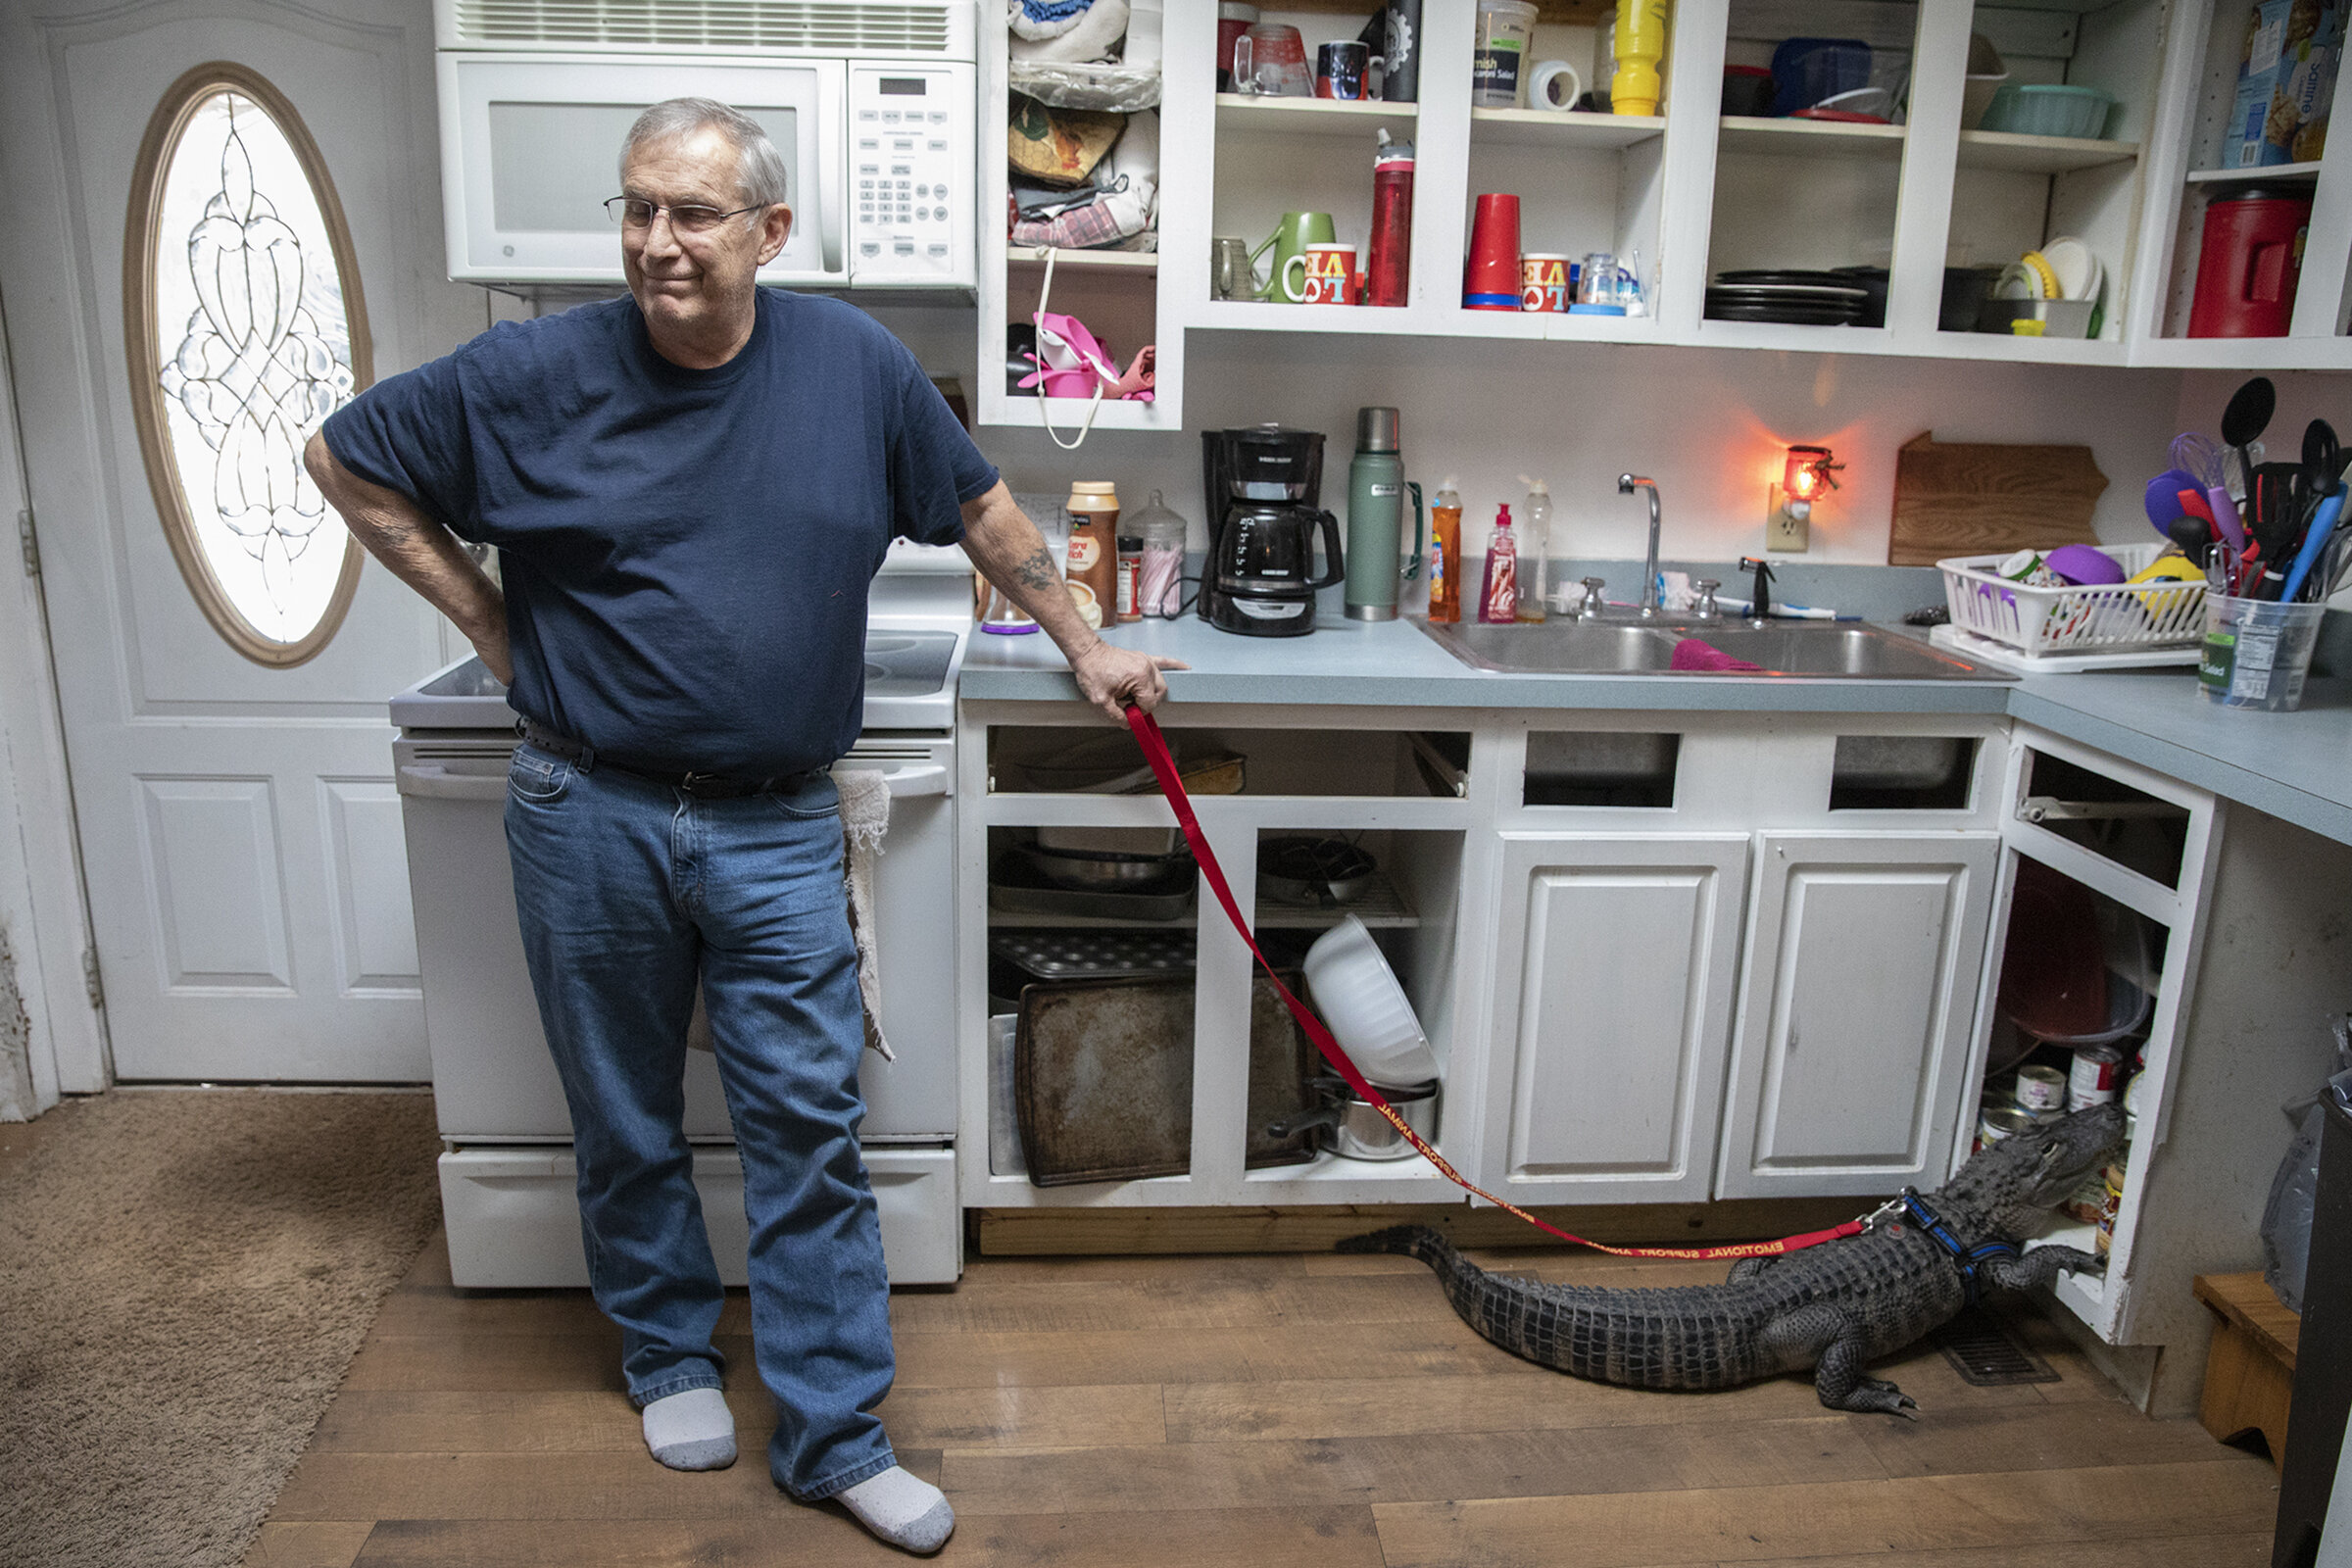  Joie Henney's emotional support alligator, Wally, rummages through the pantry inside his home in York Haven, Pa. on Tuesday, Jan. 22, 2019. Wally is currently the only registered emotional support alligator in the country. 